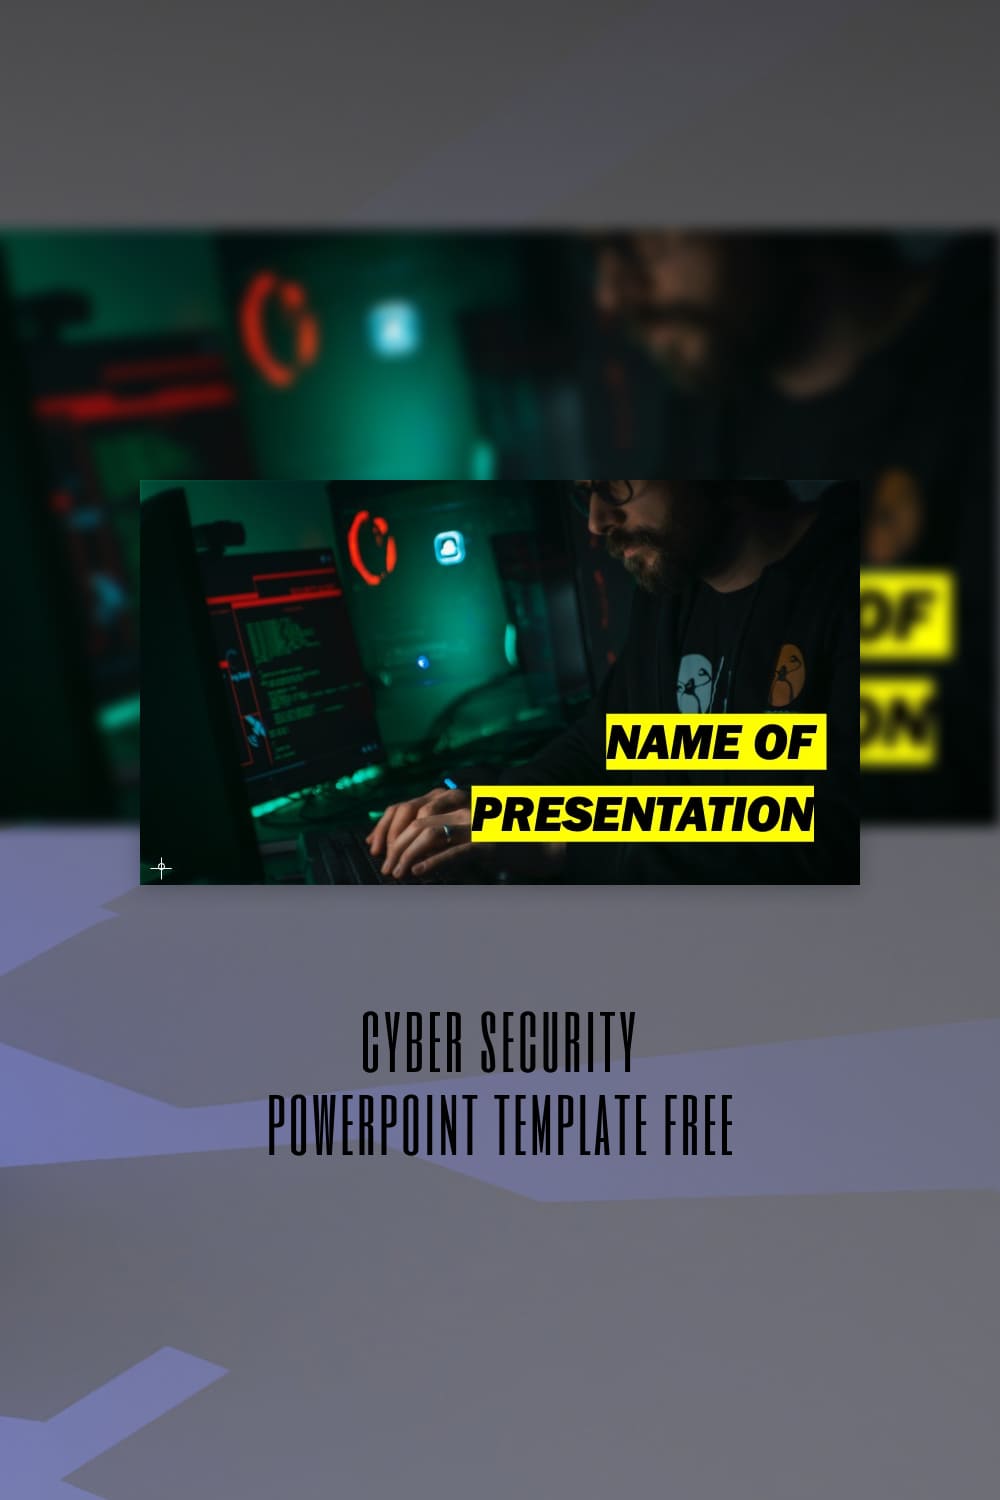 Cyber Security Powerpoint Template Free Pinterest.